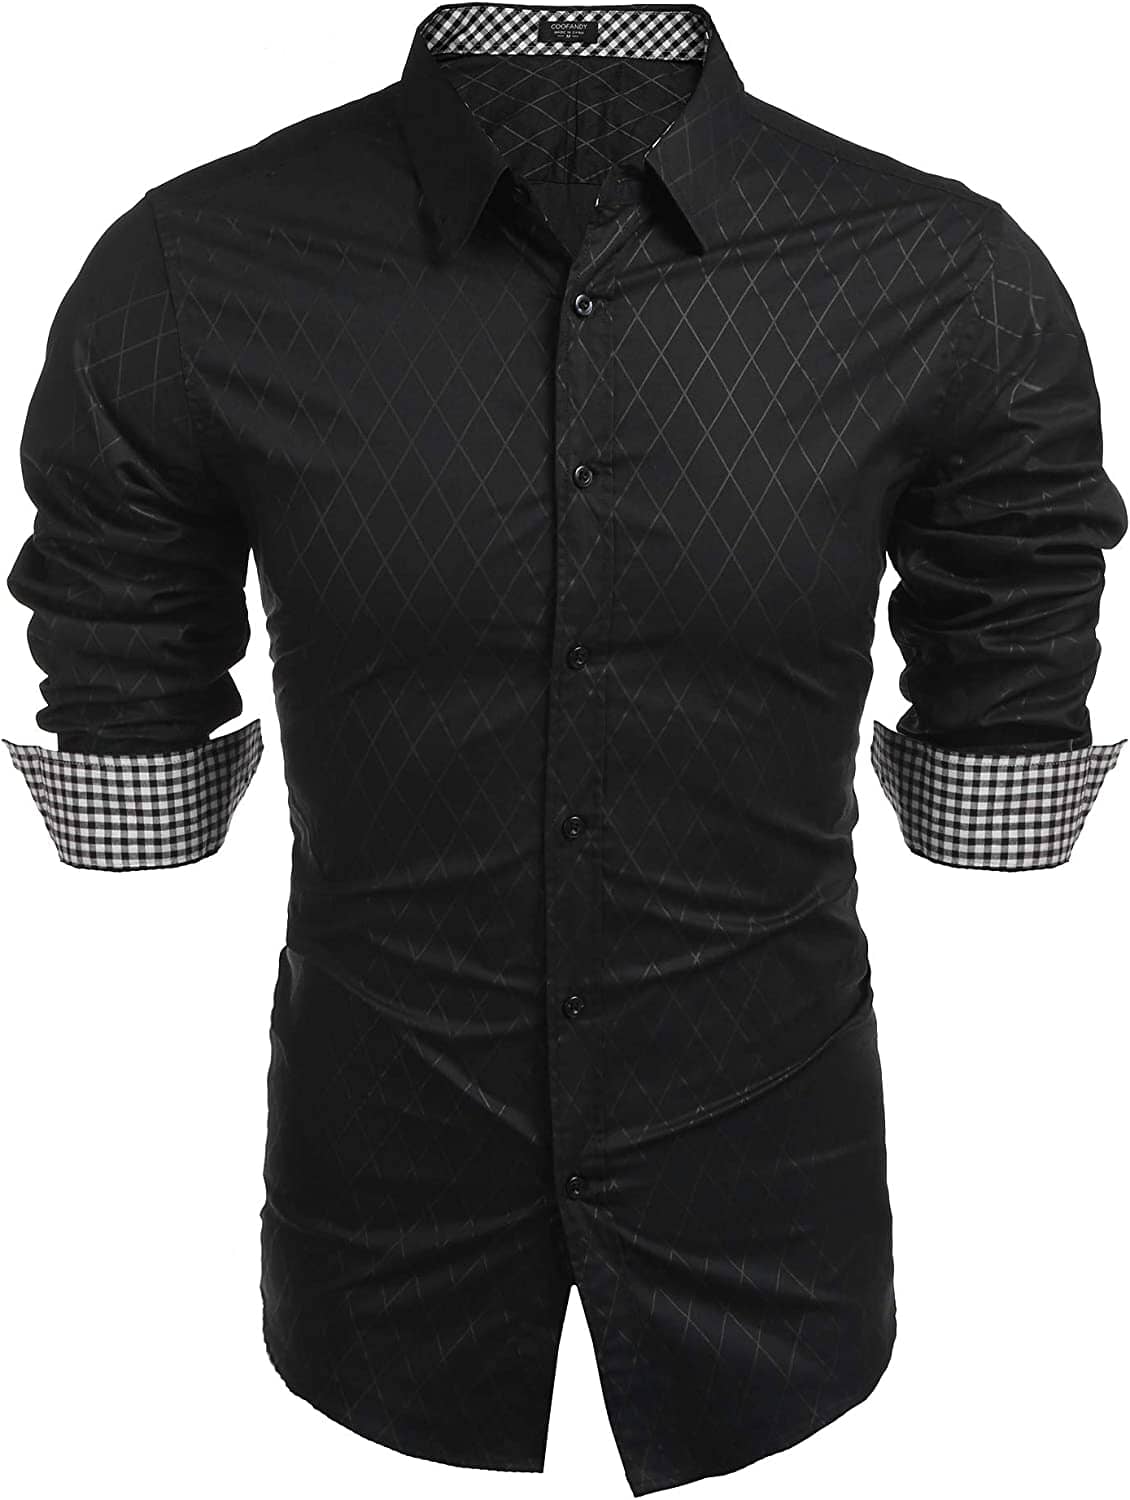 Business Long Sleeve Slim Fit Dress Shirt (US Only) Shirts COOFANDY Store Black S 